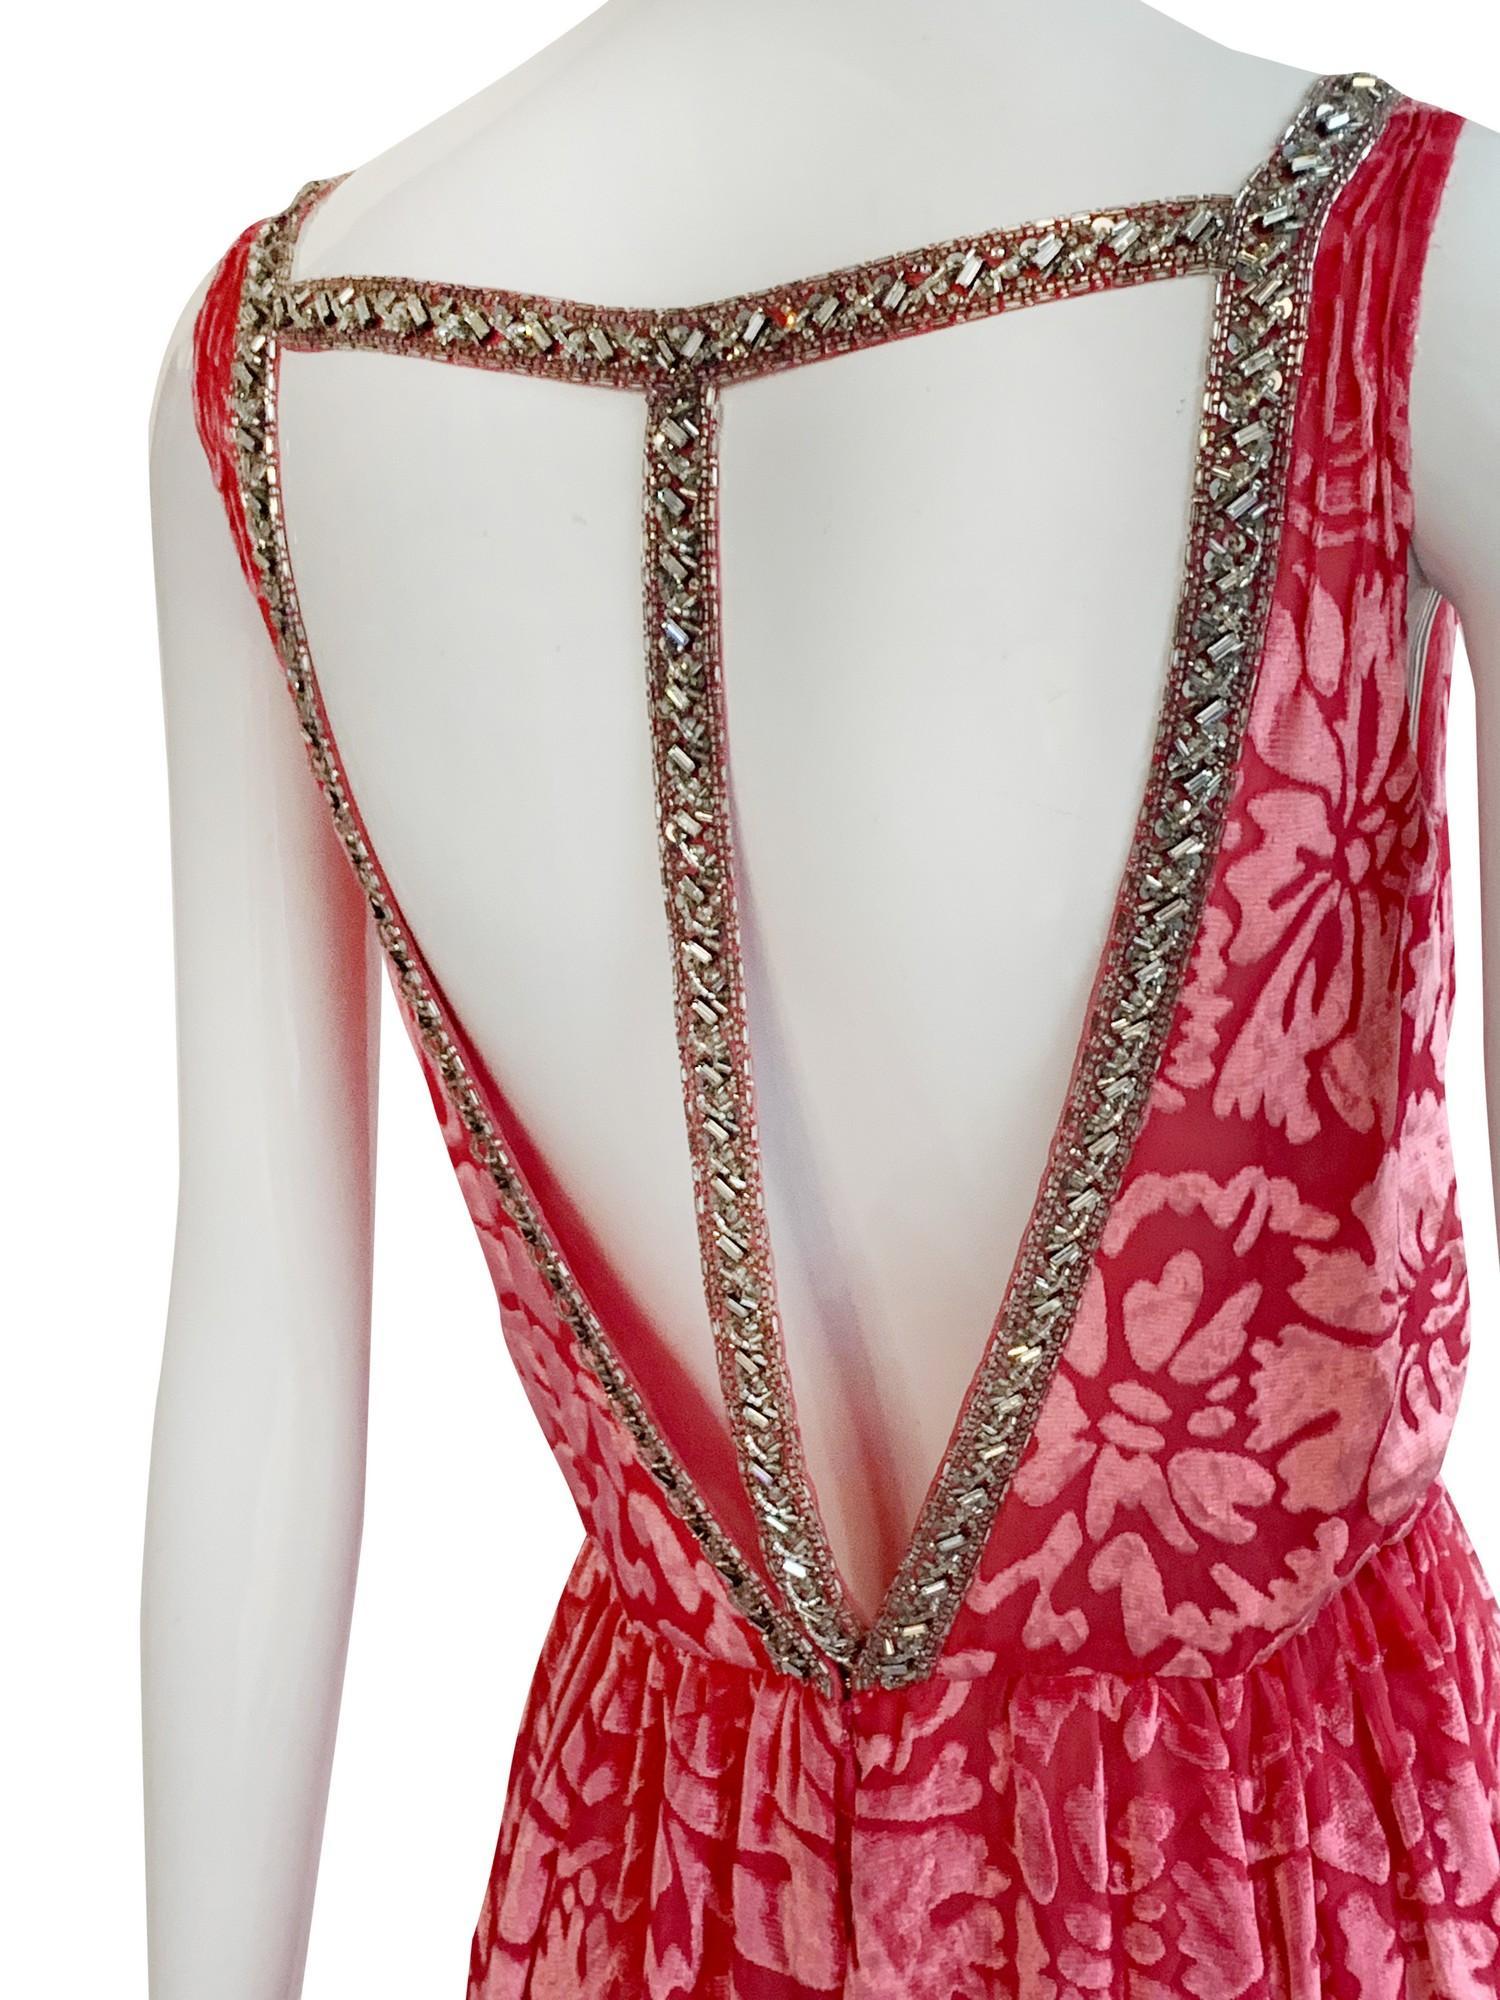 Women's Christian Dior by John Galliano Pink Devore Velvet Evening Gown w/Jeweled Trim For Sale